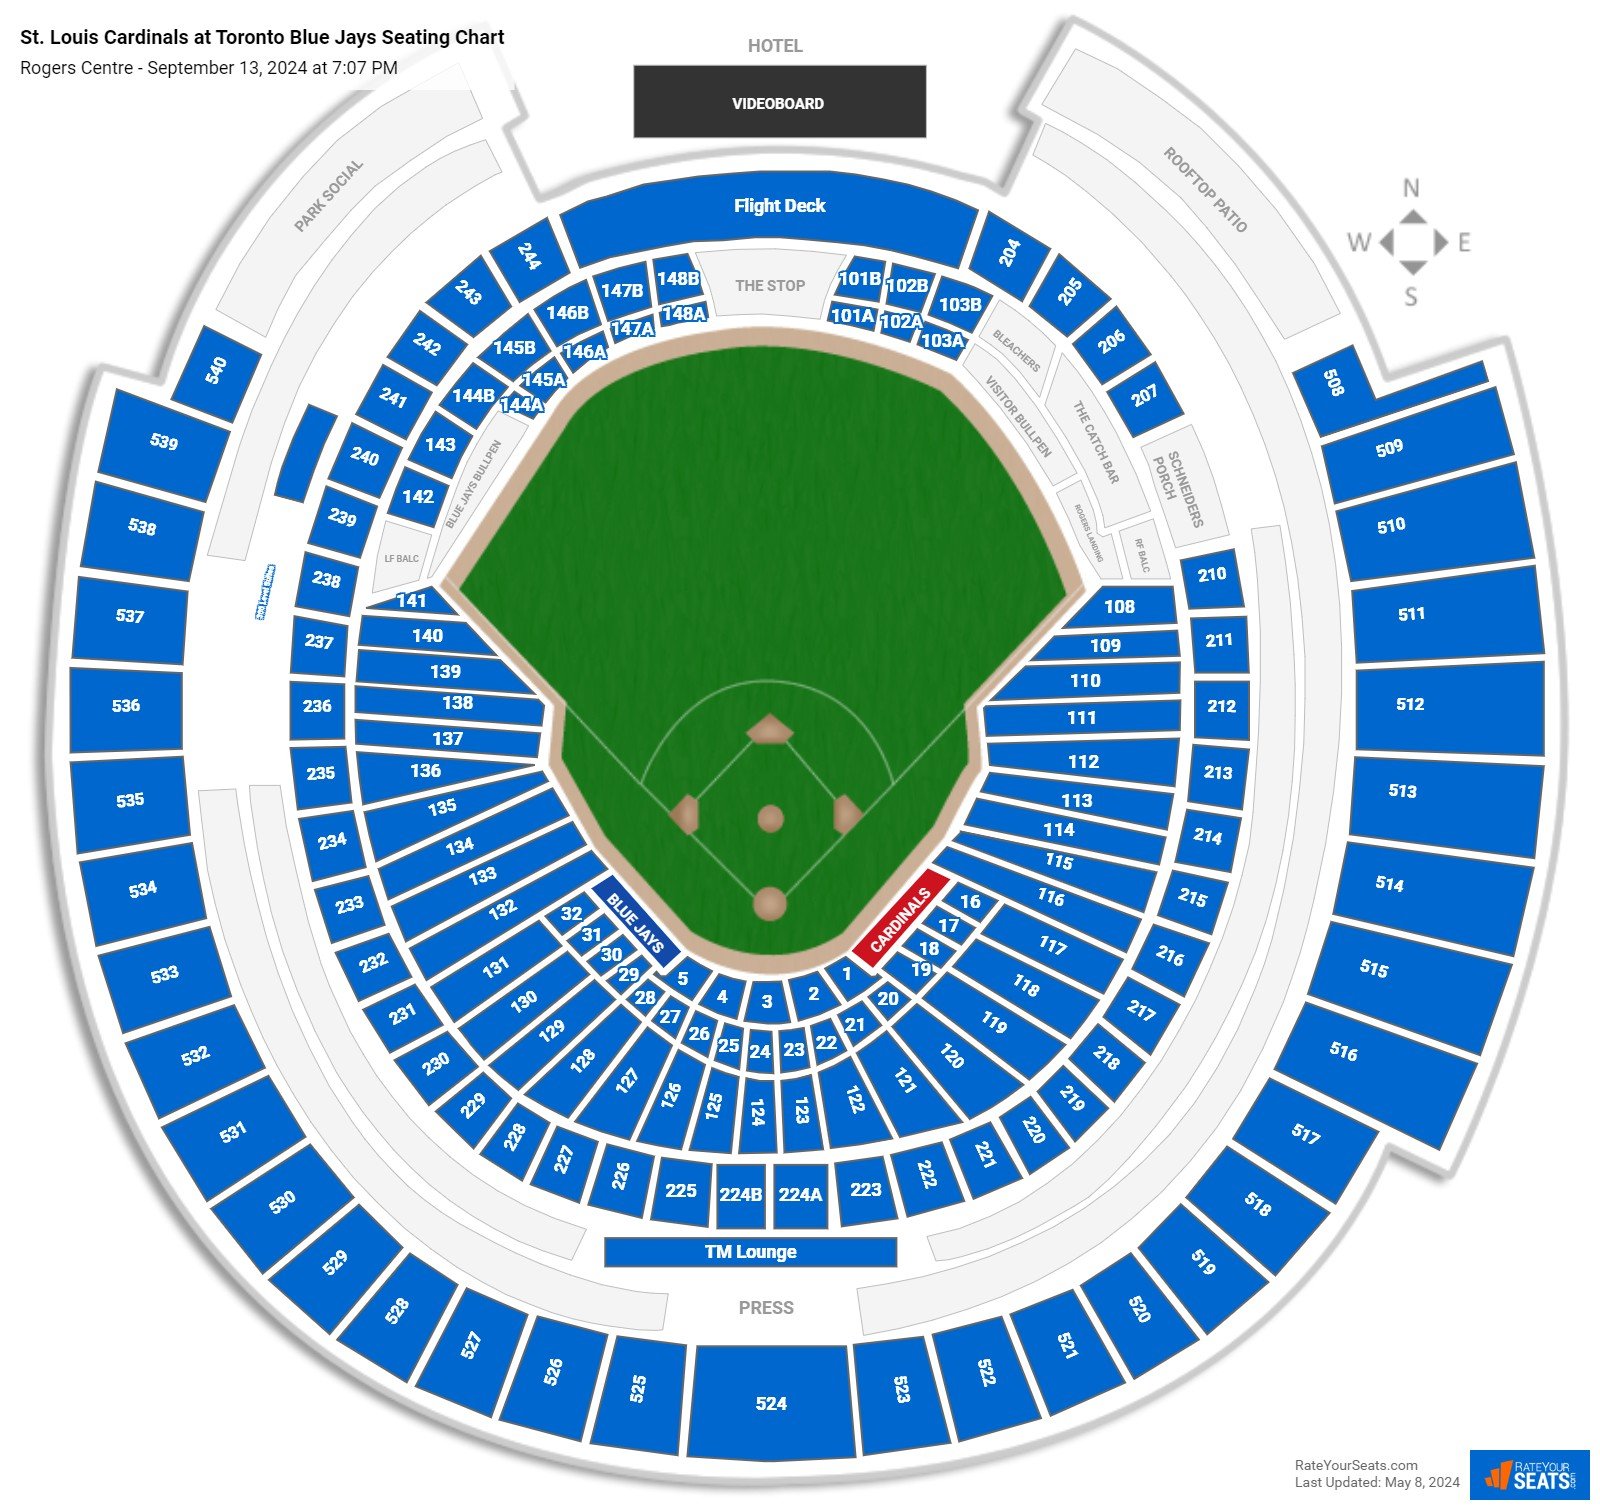 St. Louis Cardinals at Toronto Blue Jays seating chart Rogers Centre